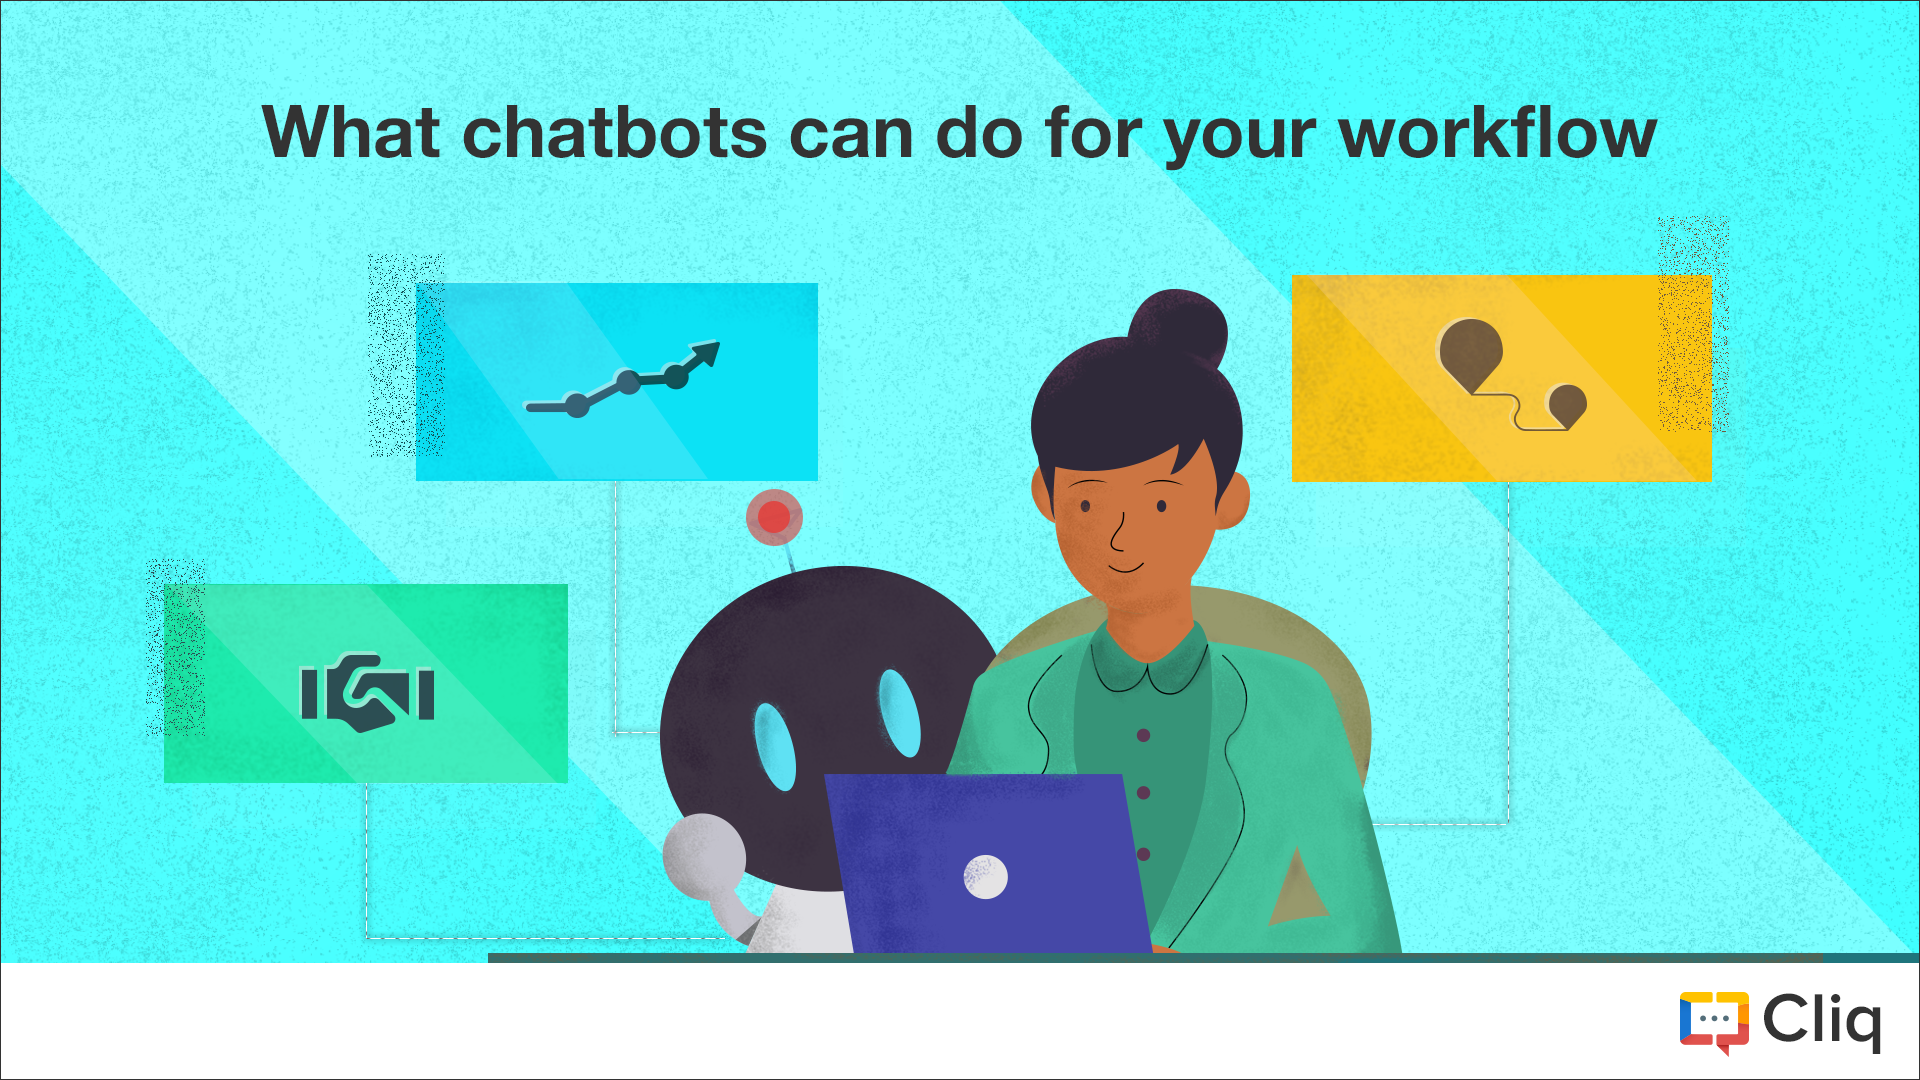 Bots on the rise: What chatbots can do for your workflow